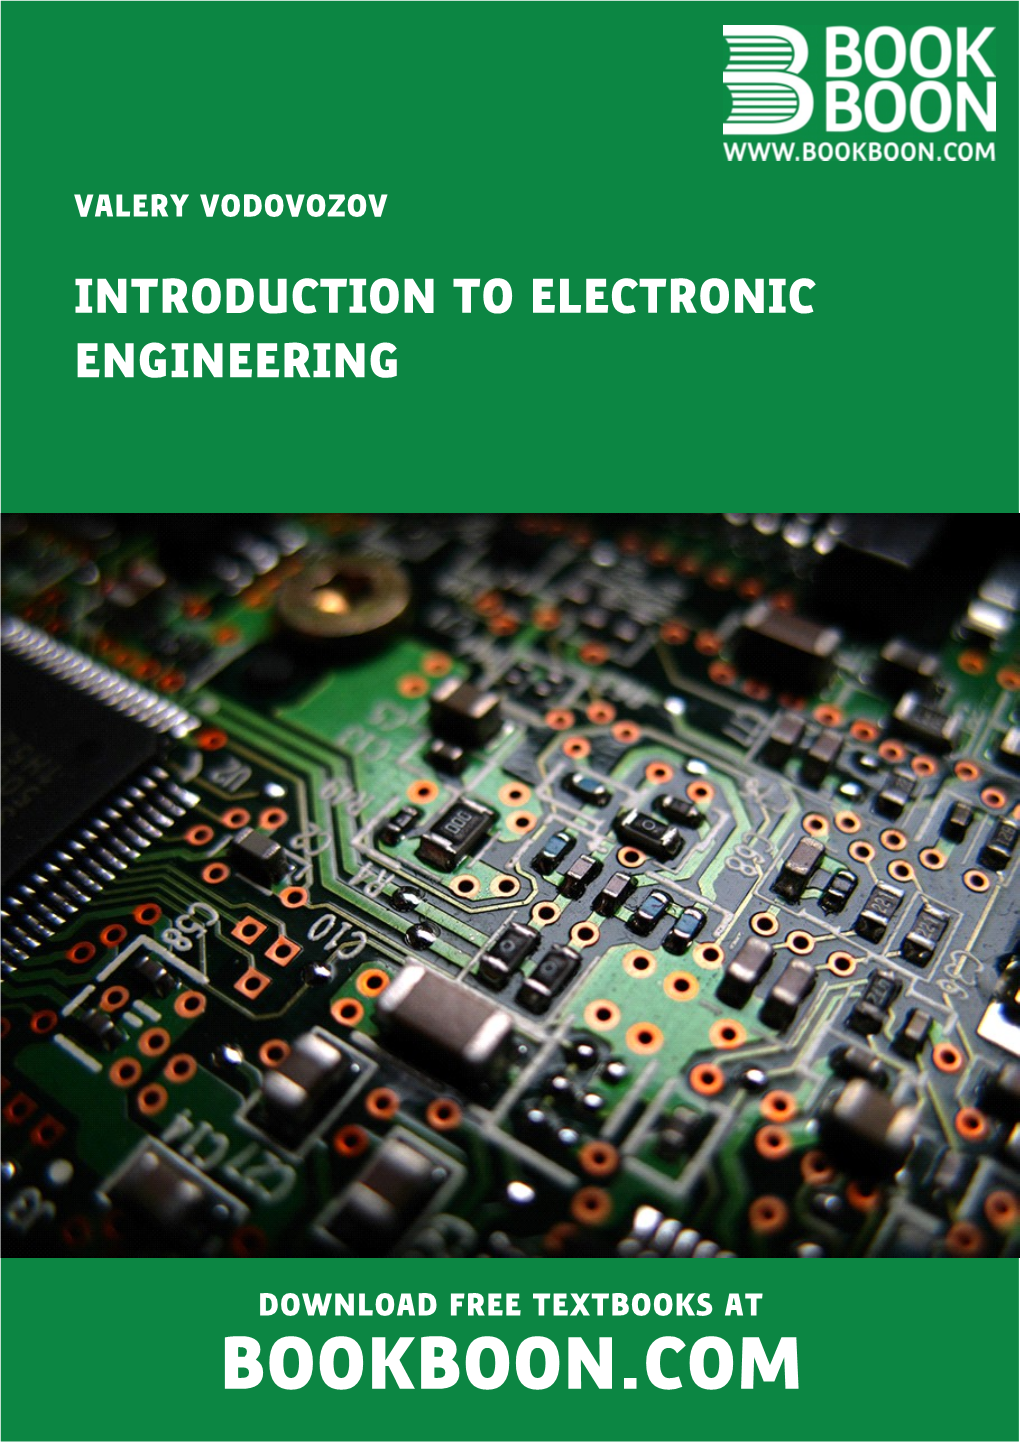 Introduction to Electronic Engineering